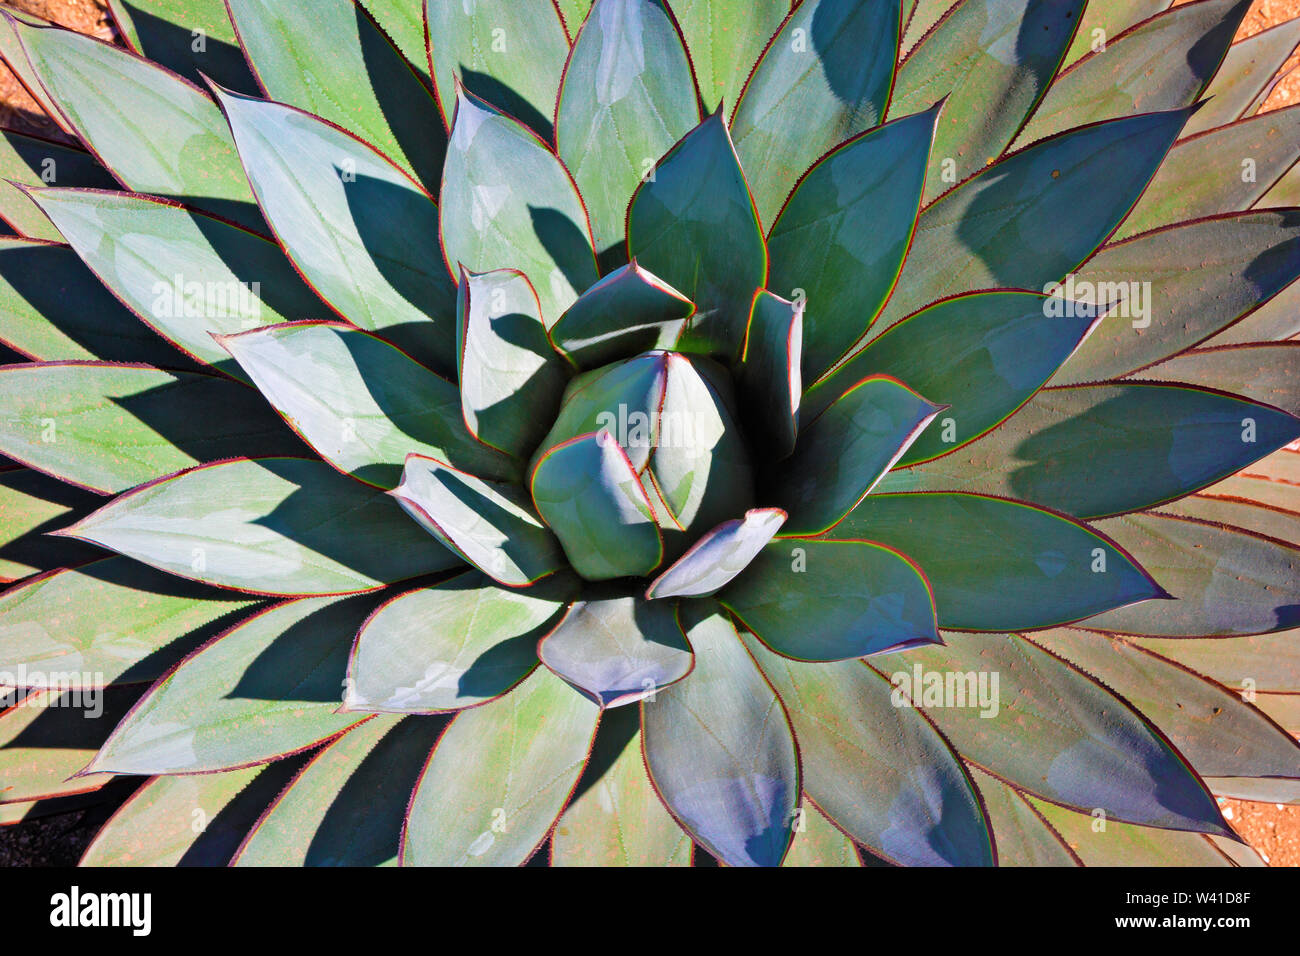 Symmetry of agave leaves Stock Photo